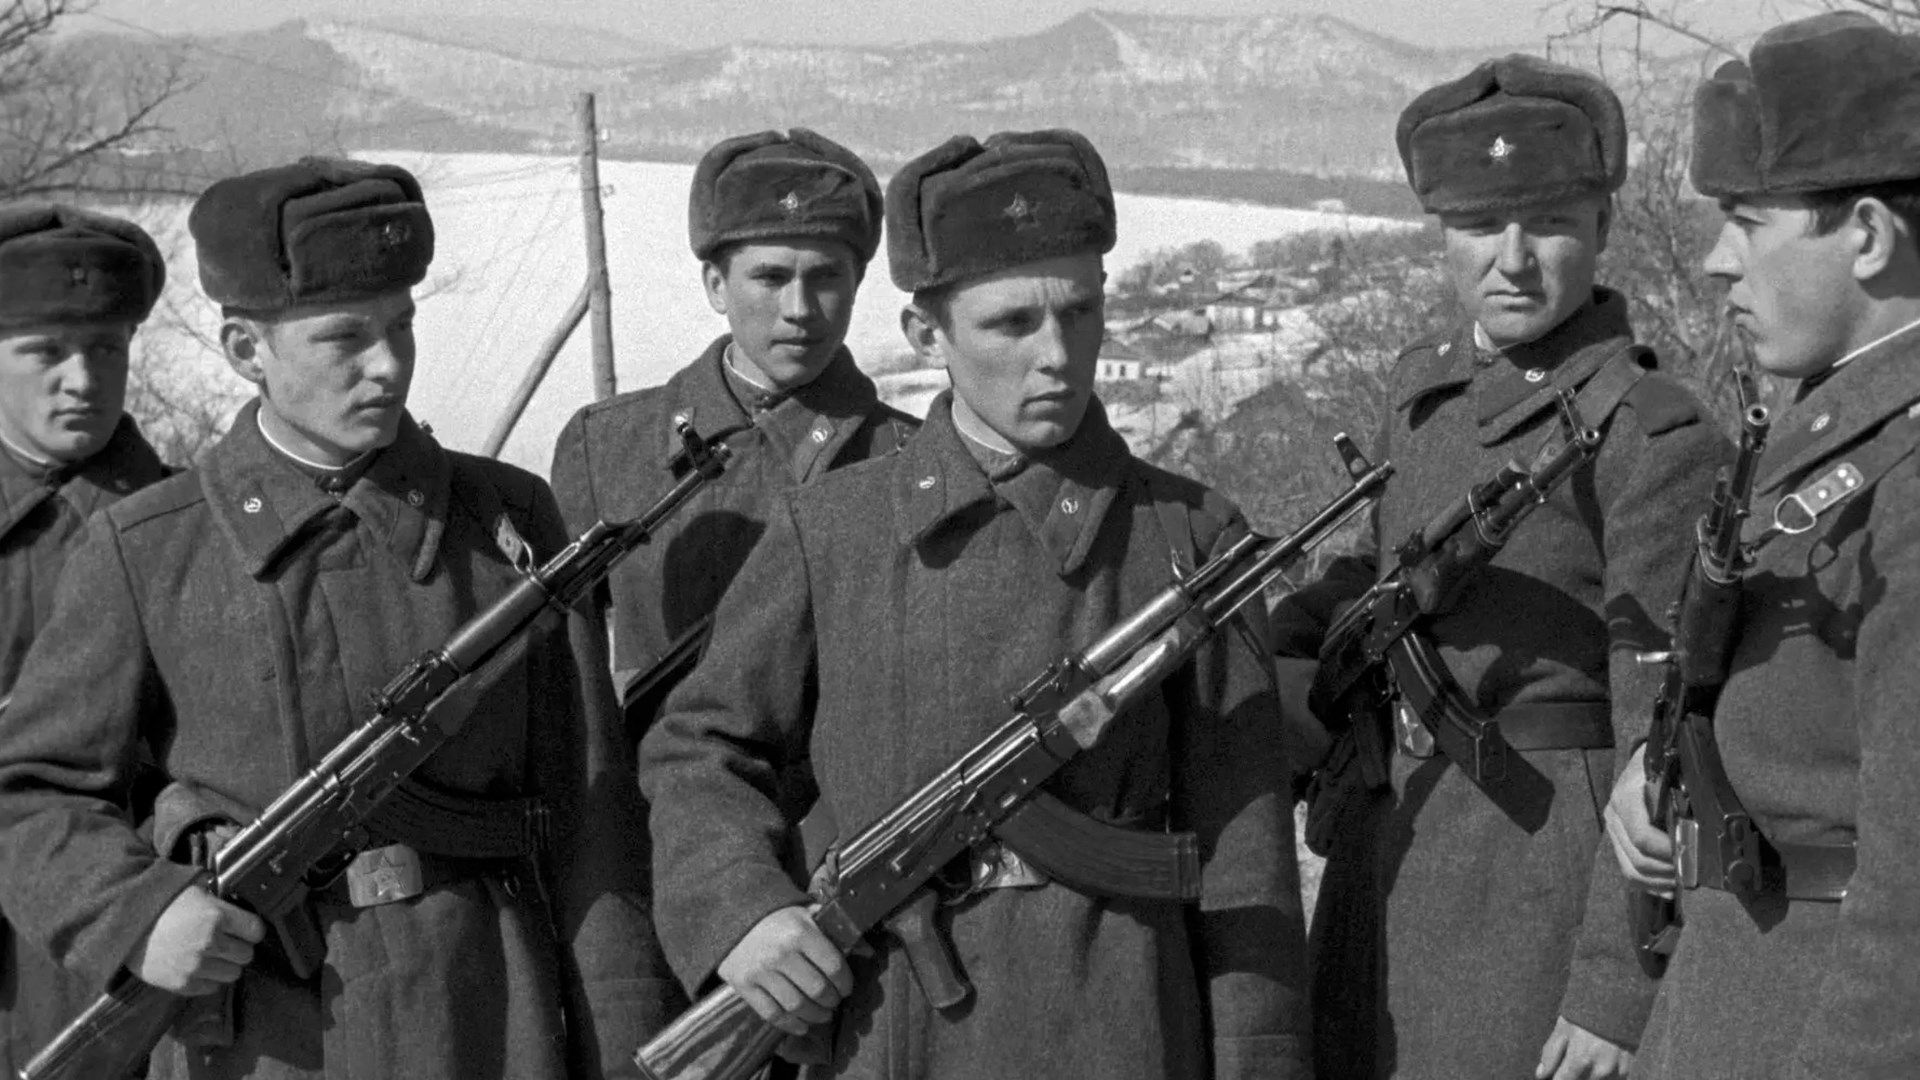 Soviet troops armed with the AKM seen here during the Sino-Soviet border conflict of 1969.